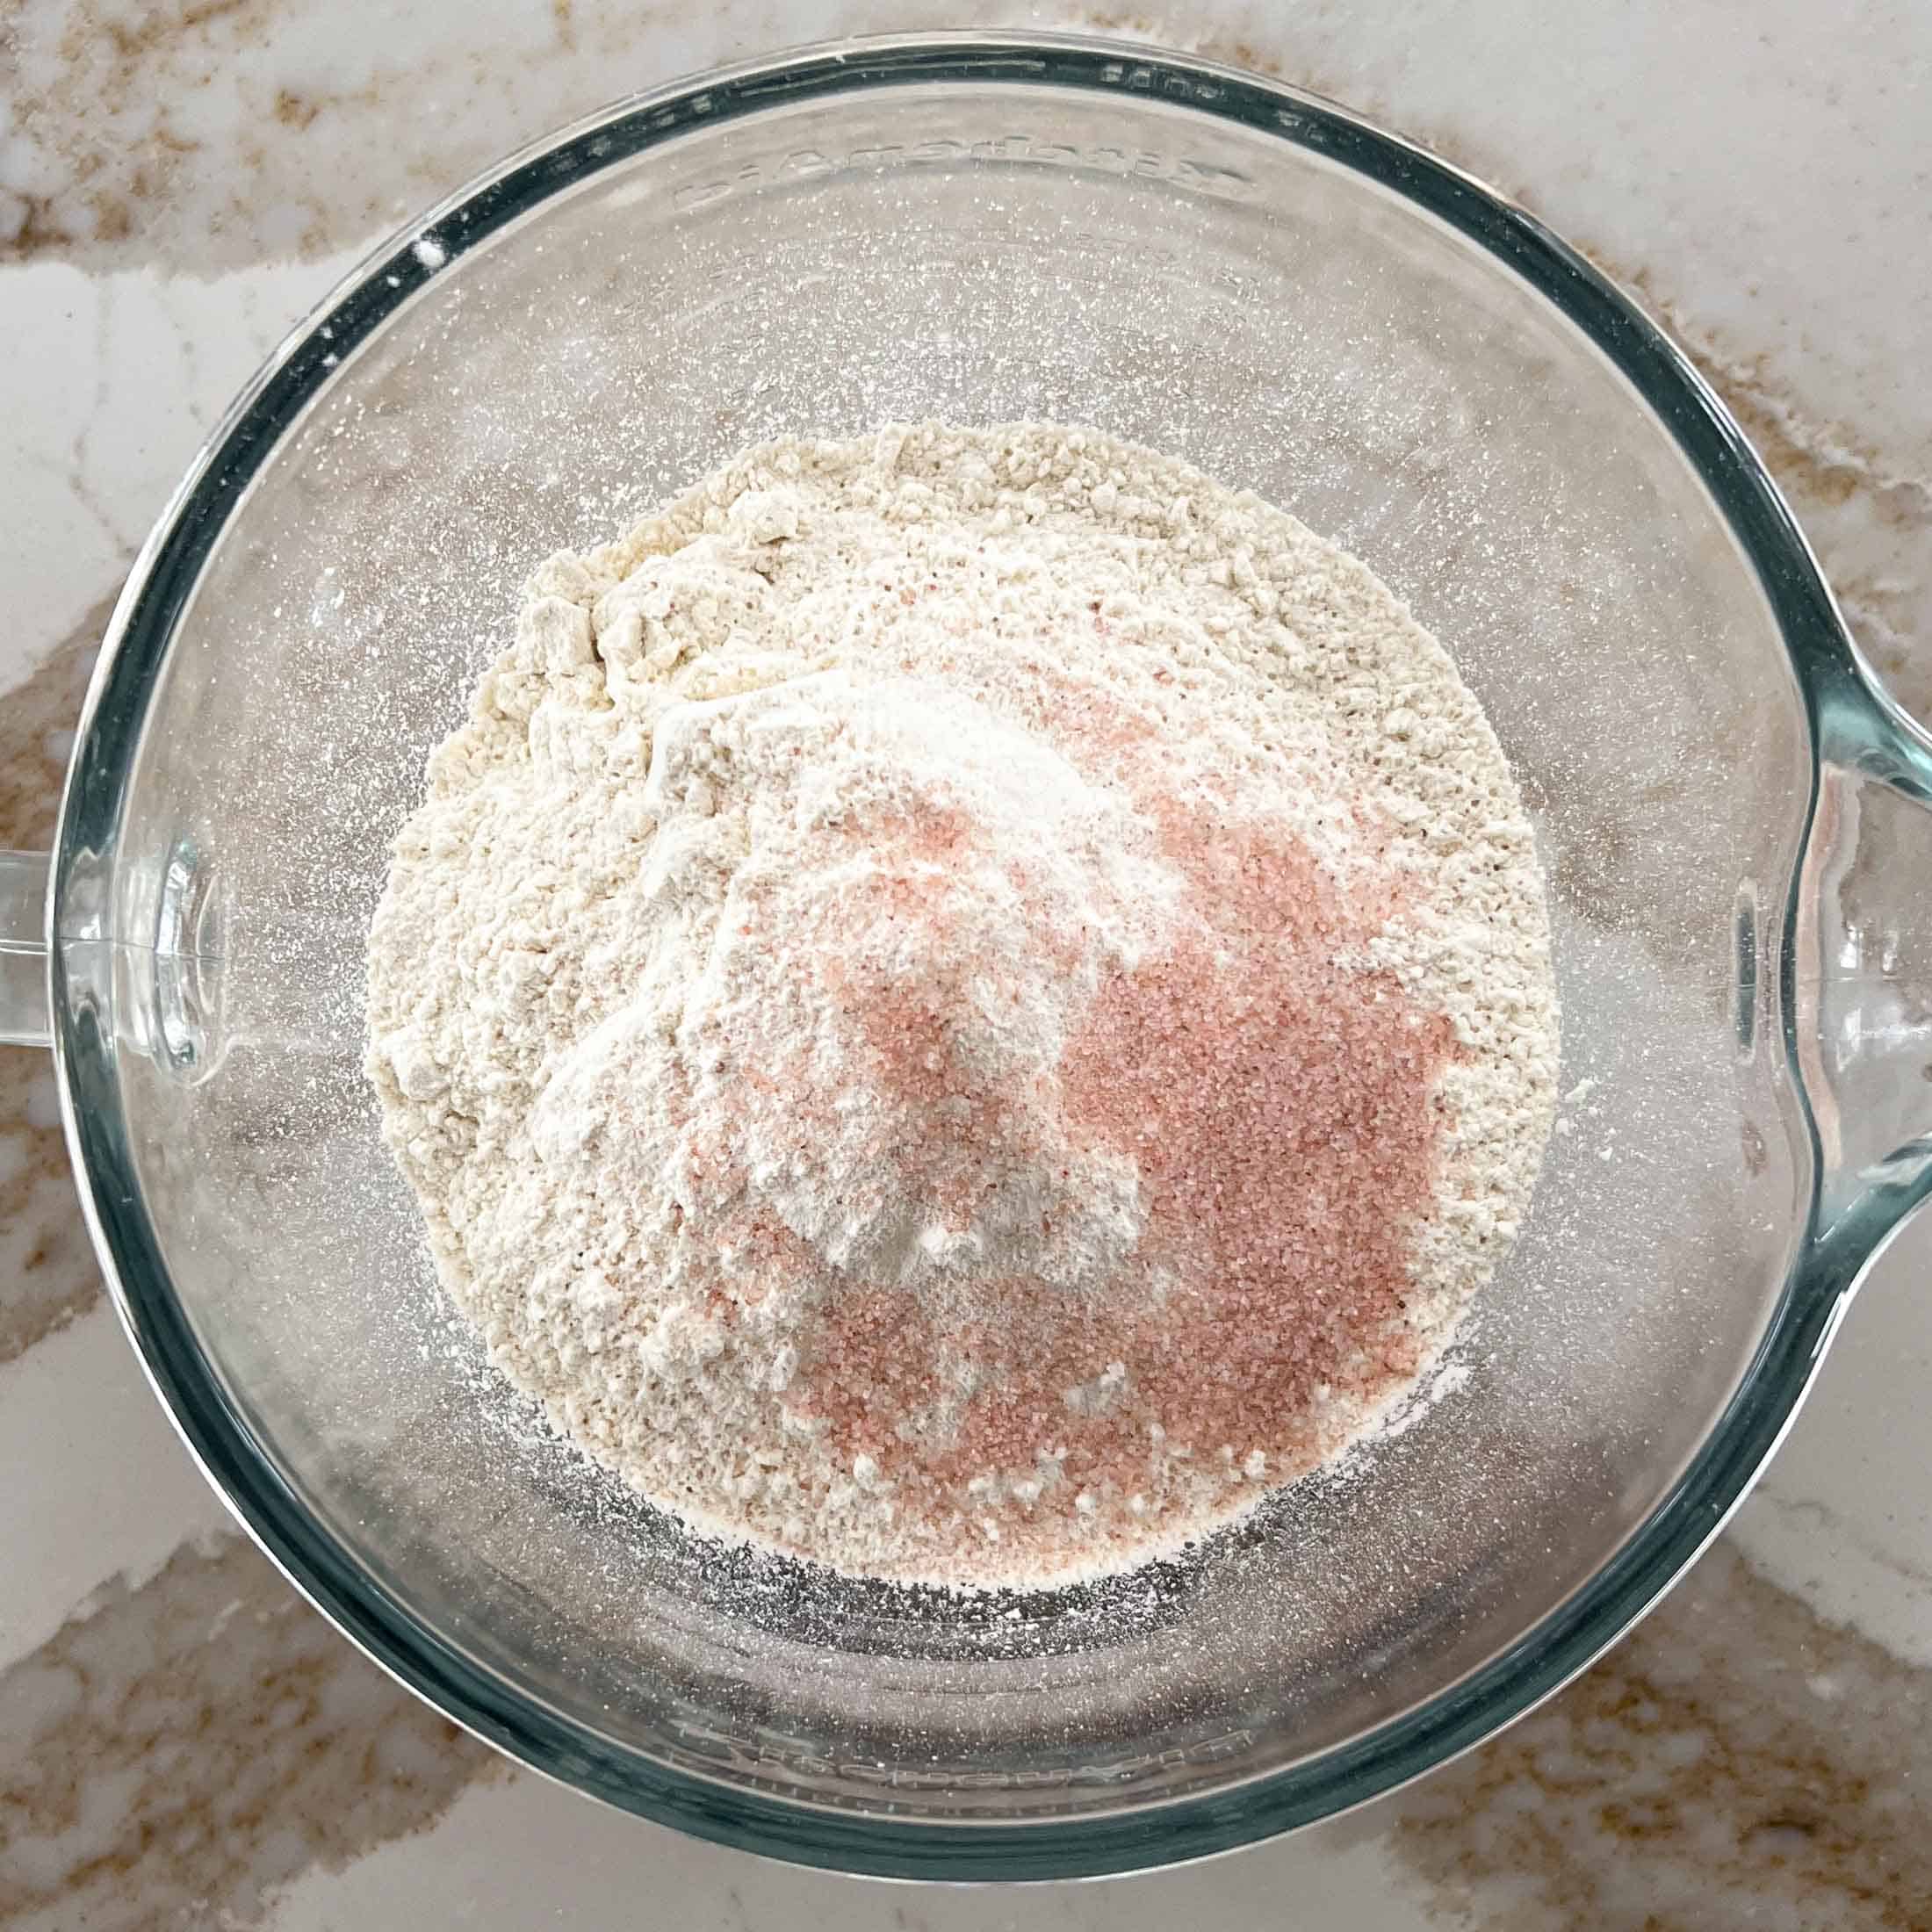 Dry ingredients in a glass bowl for sourdough sandwich loaf.